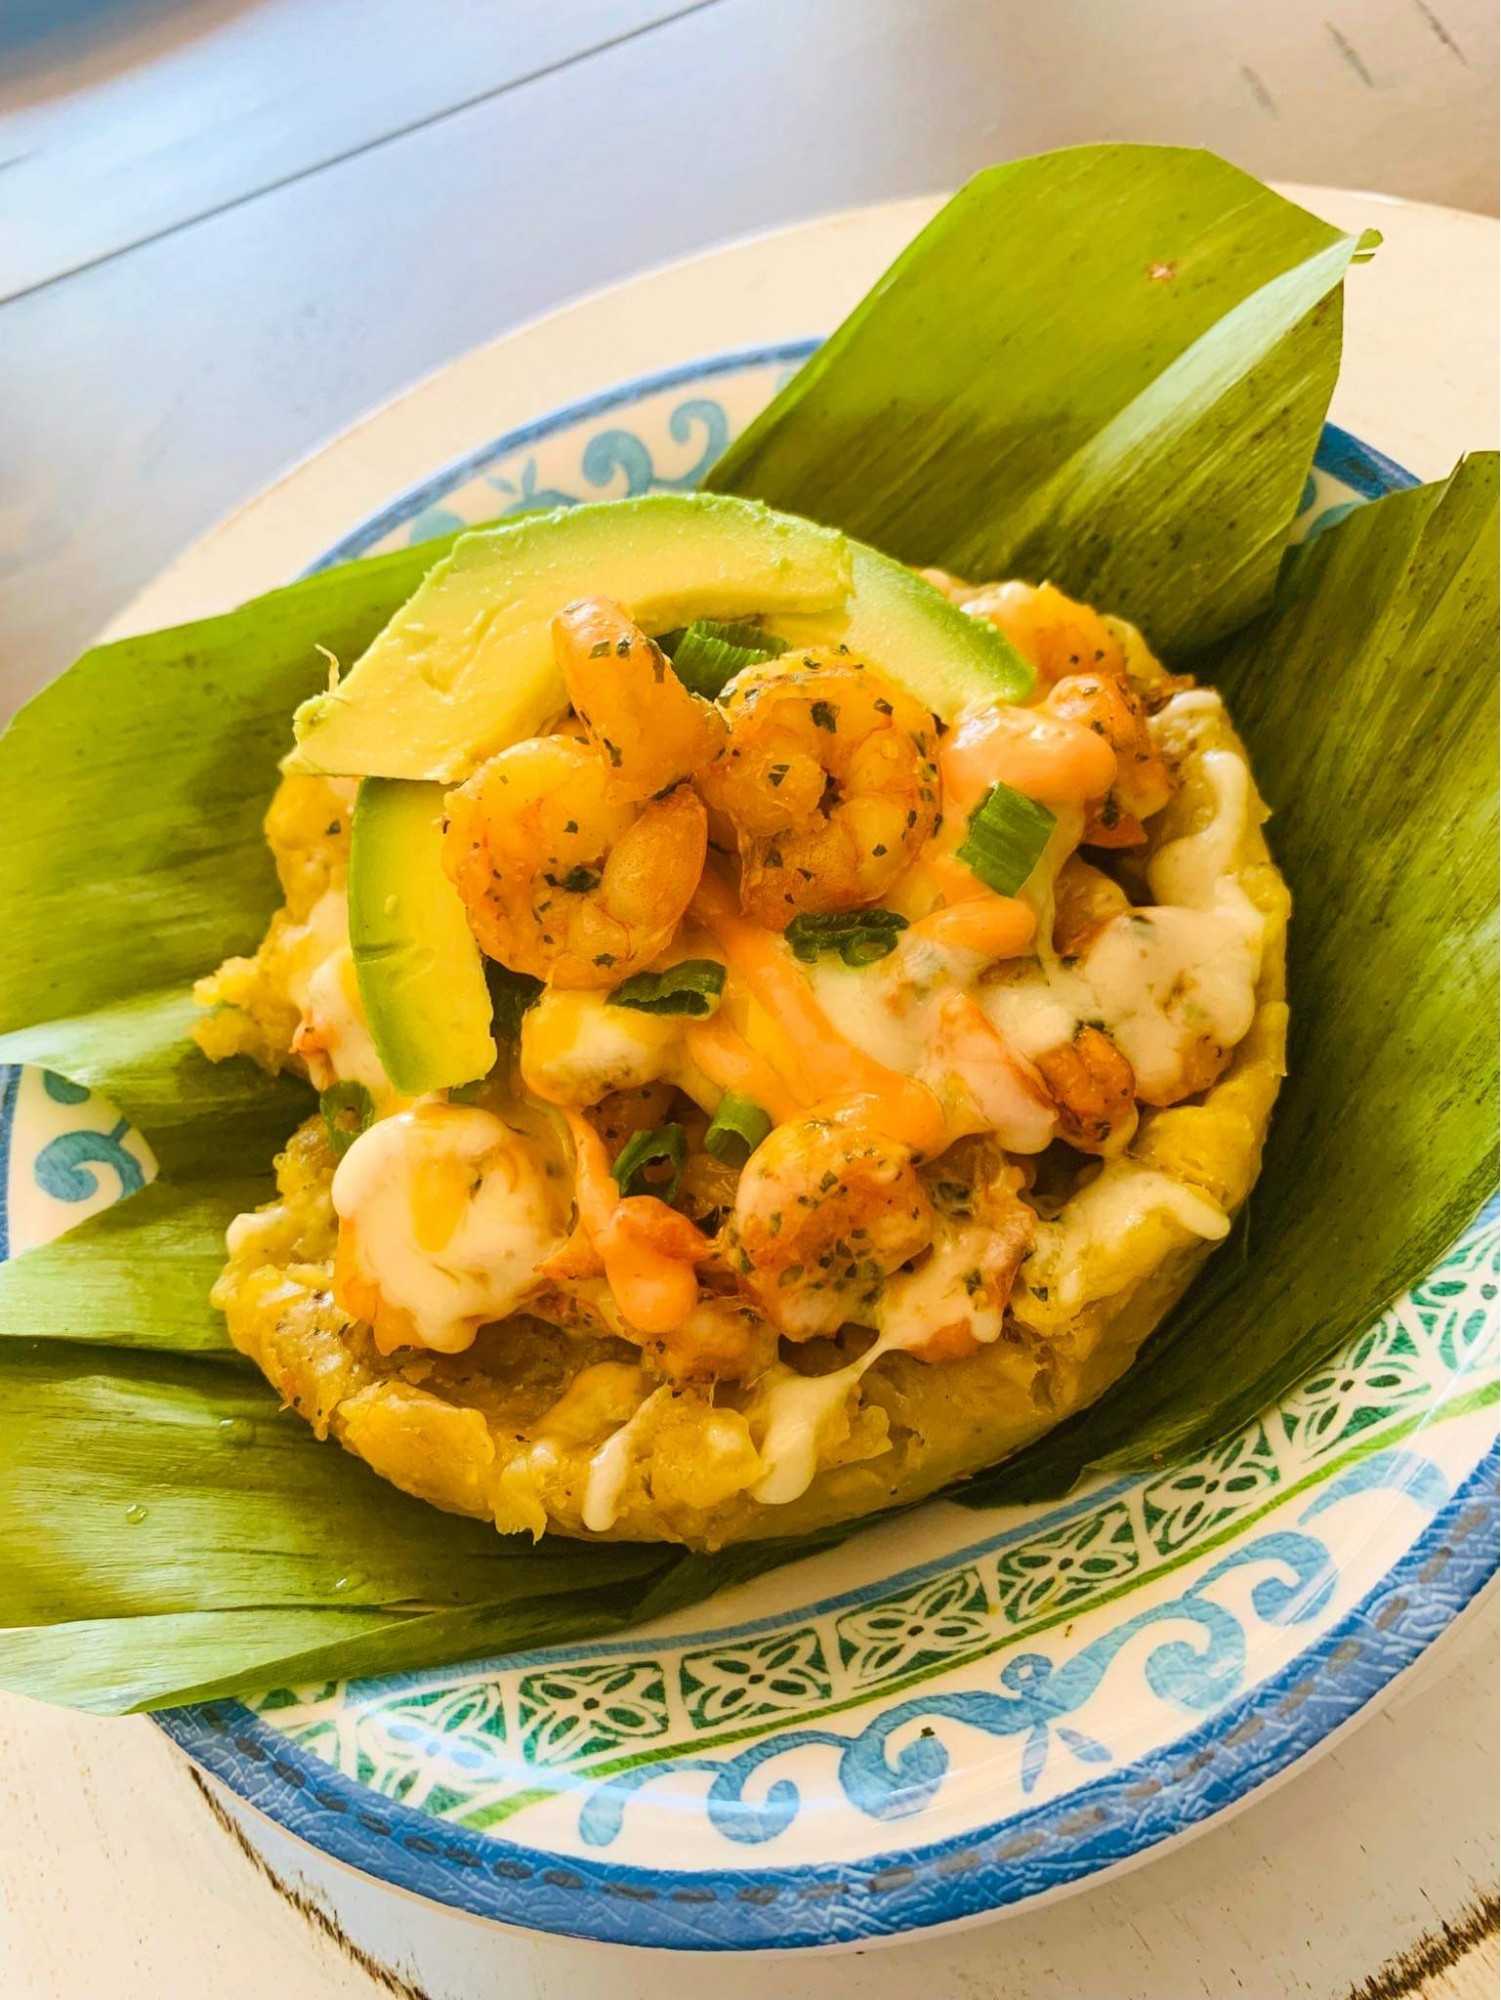 One of Dayami Exposito's menu items she made for her business, Cucusa's Caribbean Cuisine, mofongo stuffed with shrimp. (Courtesy Exposito)